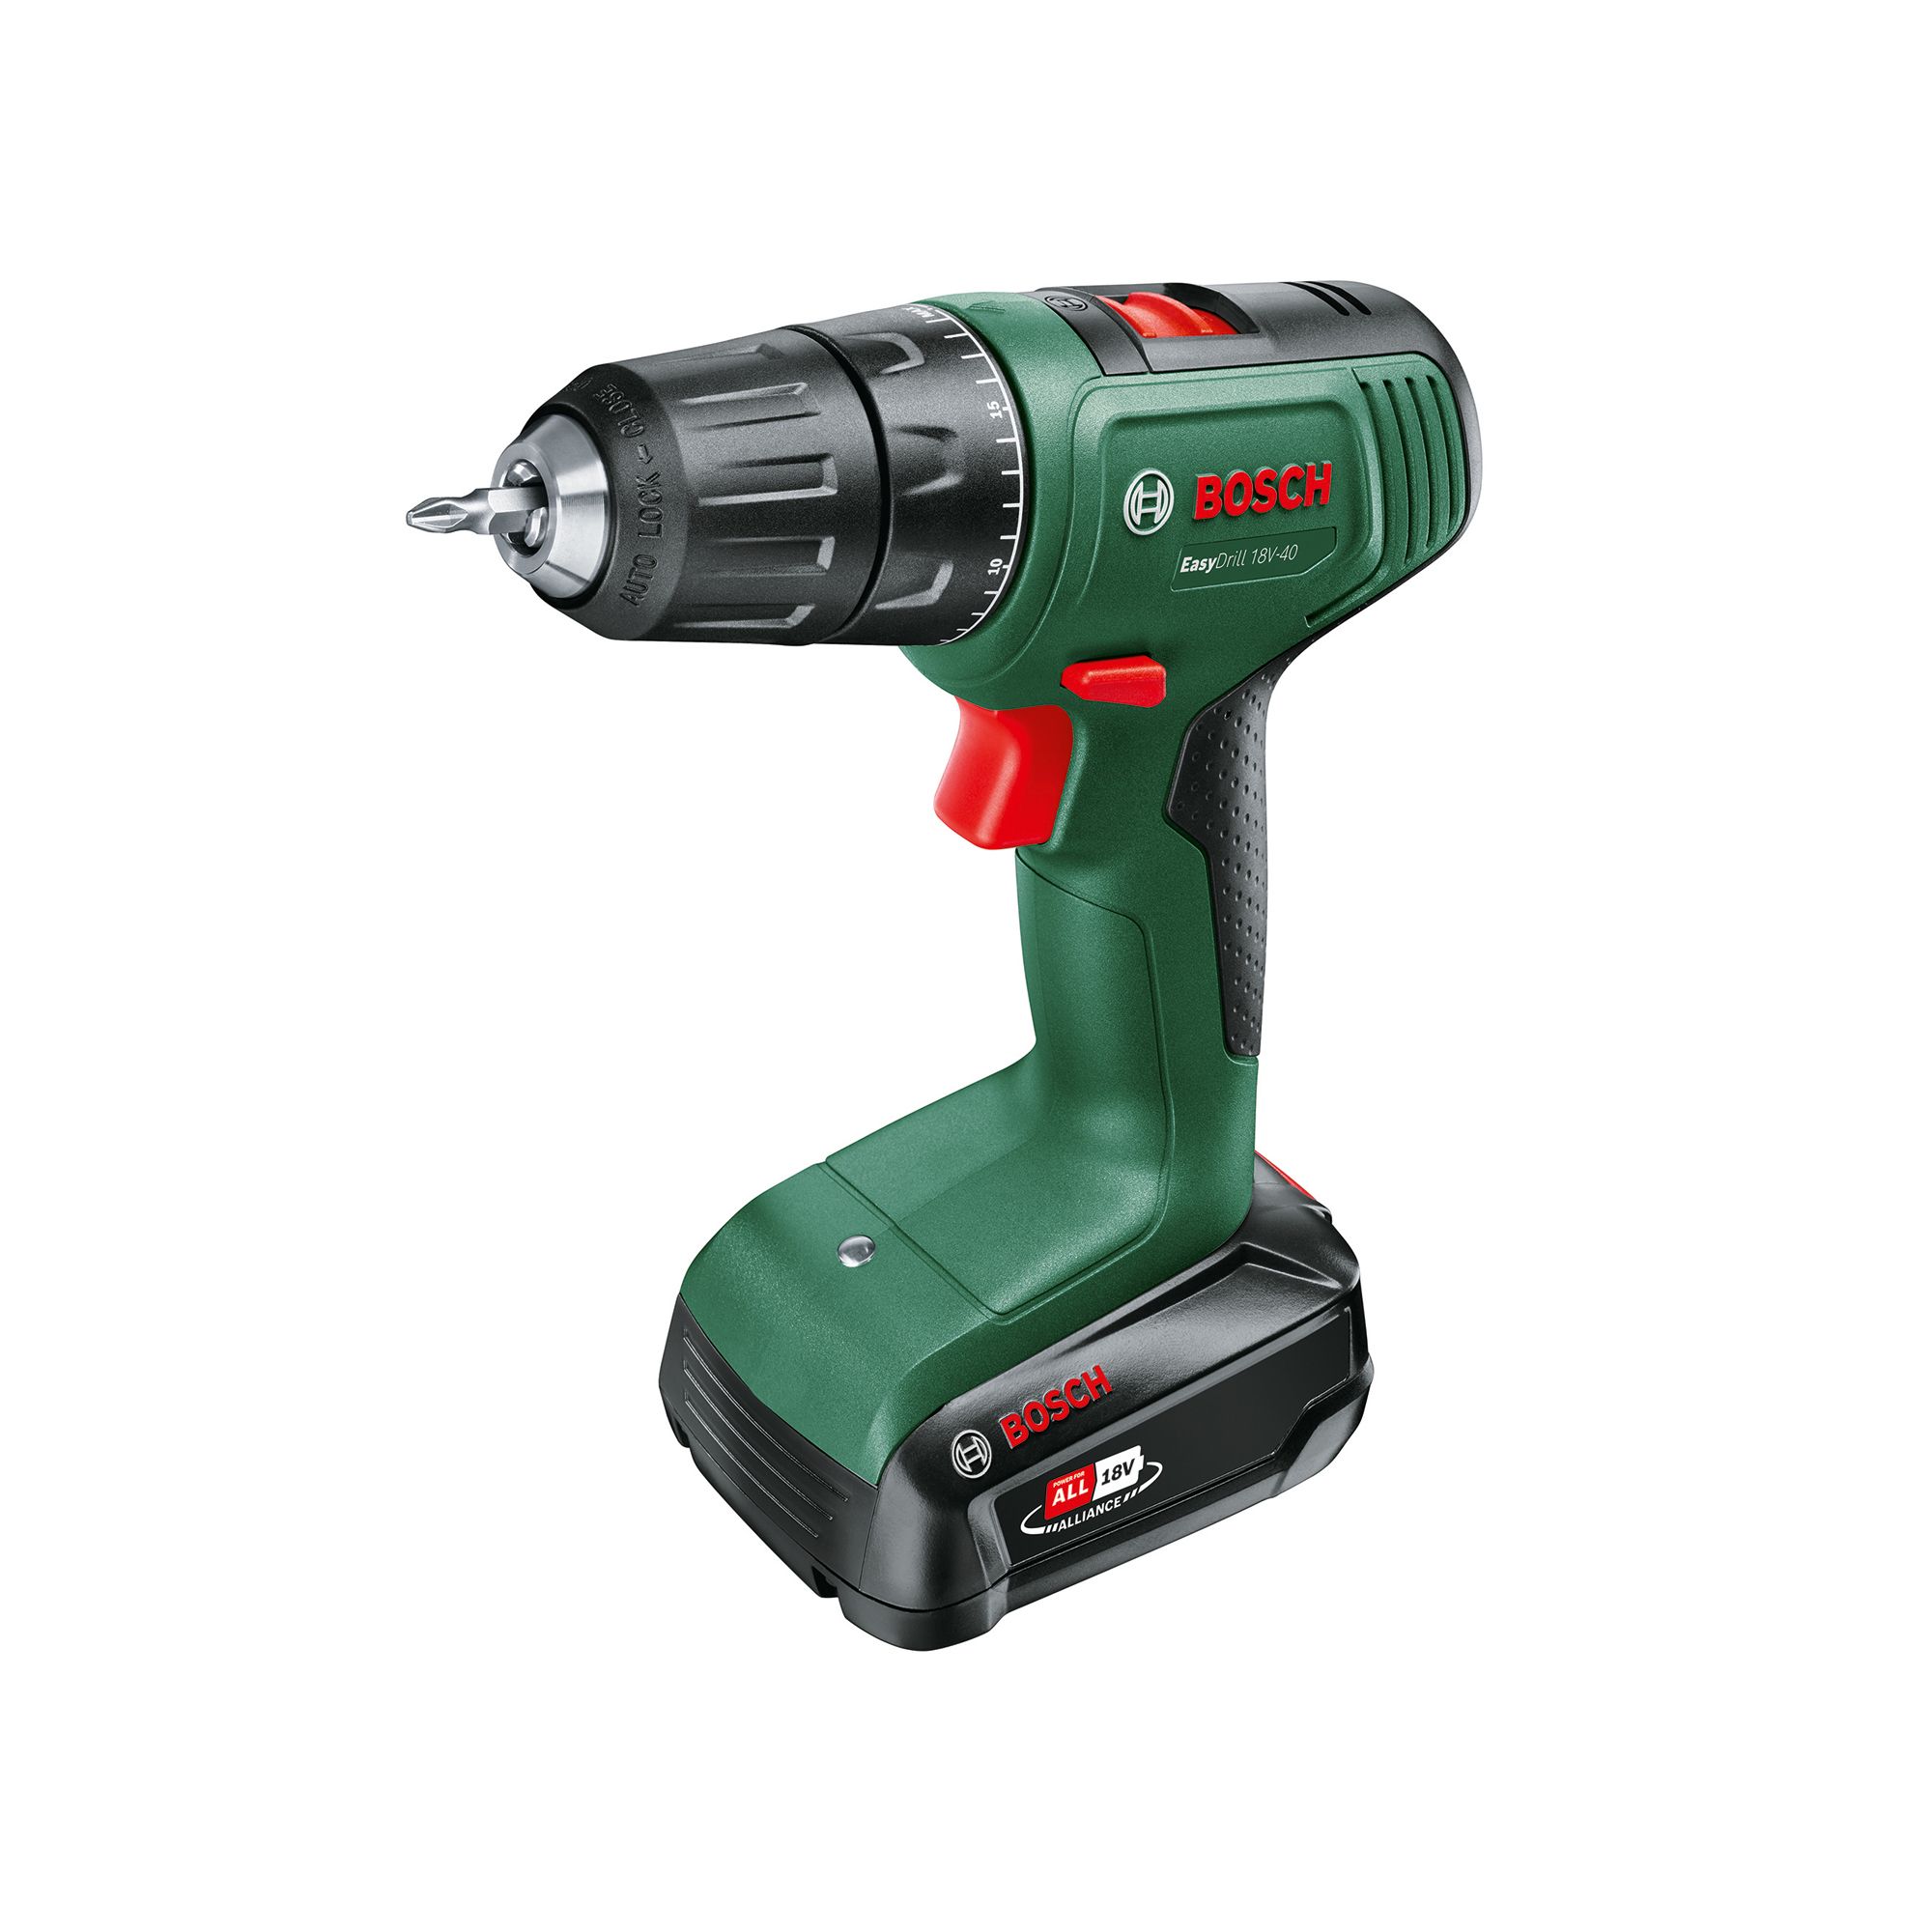 https://kingfisher.scene7.com/is/image/Kingfisher/bosch-power-for-all-18v-1-x-2-0ah-li-ion-cordless-drill-driver-easydrill-18v-40~4053423232578_01c_bq?$MOB_PREV$&$width=618&$height=618